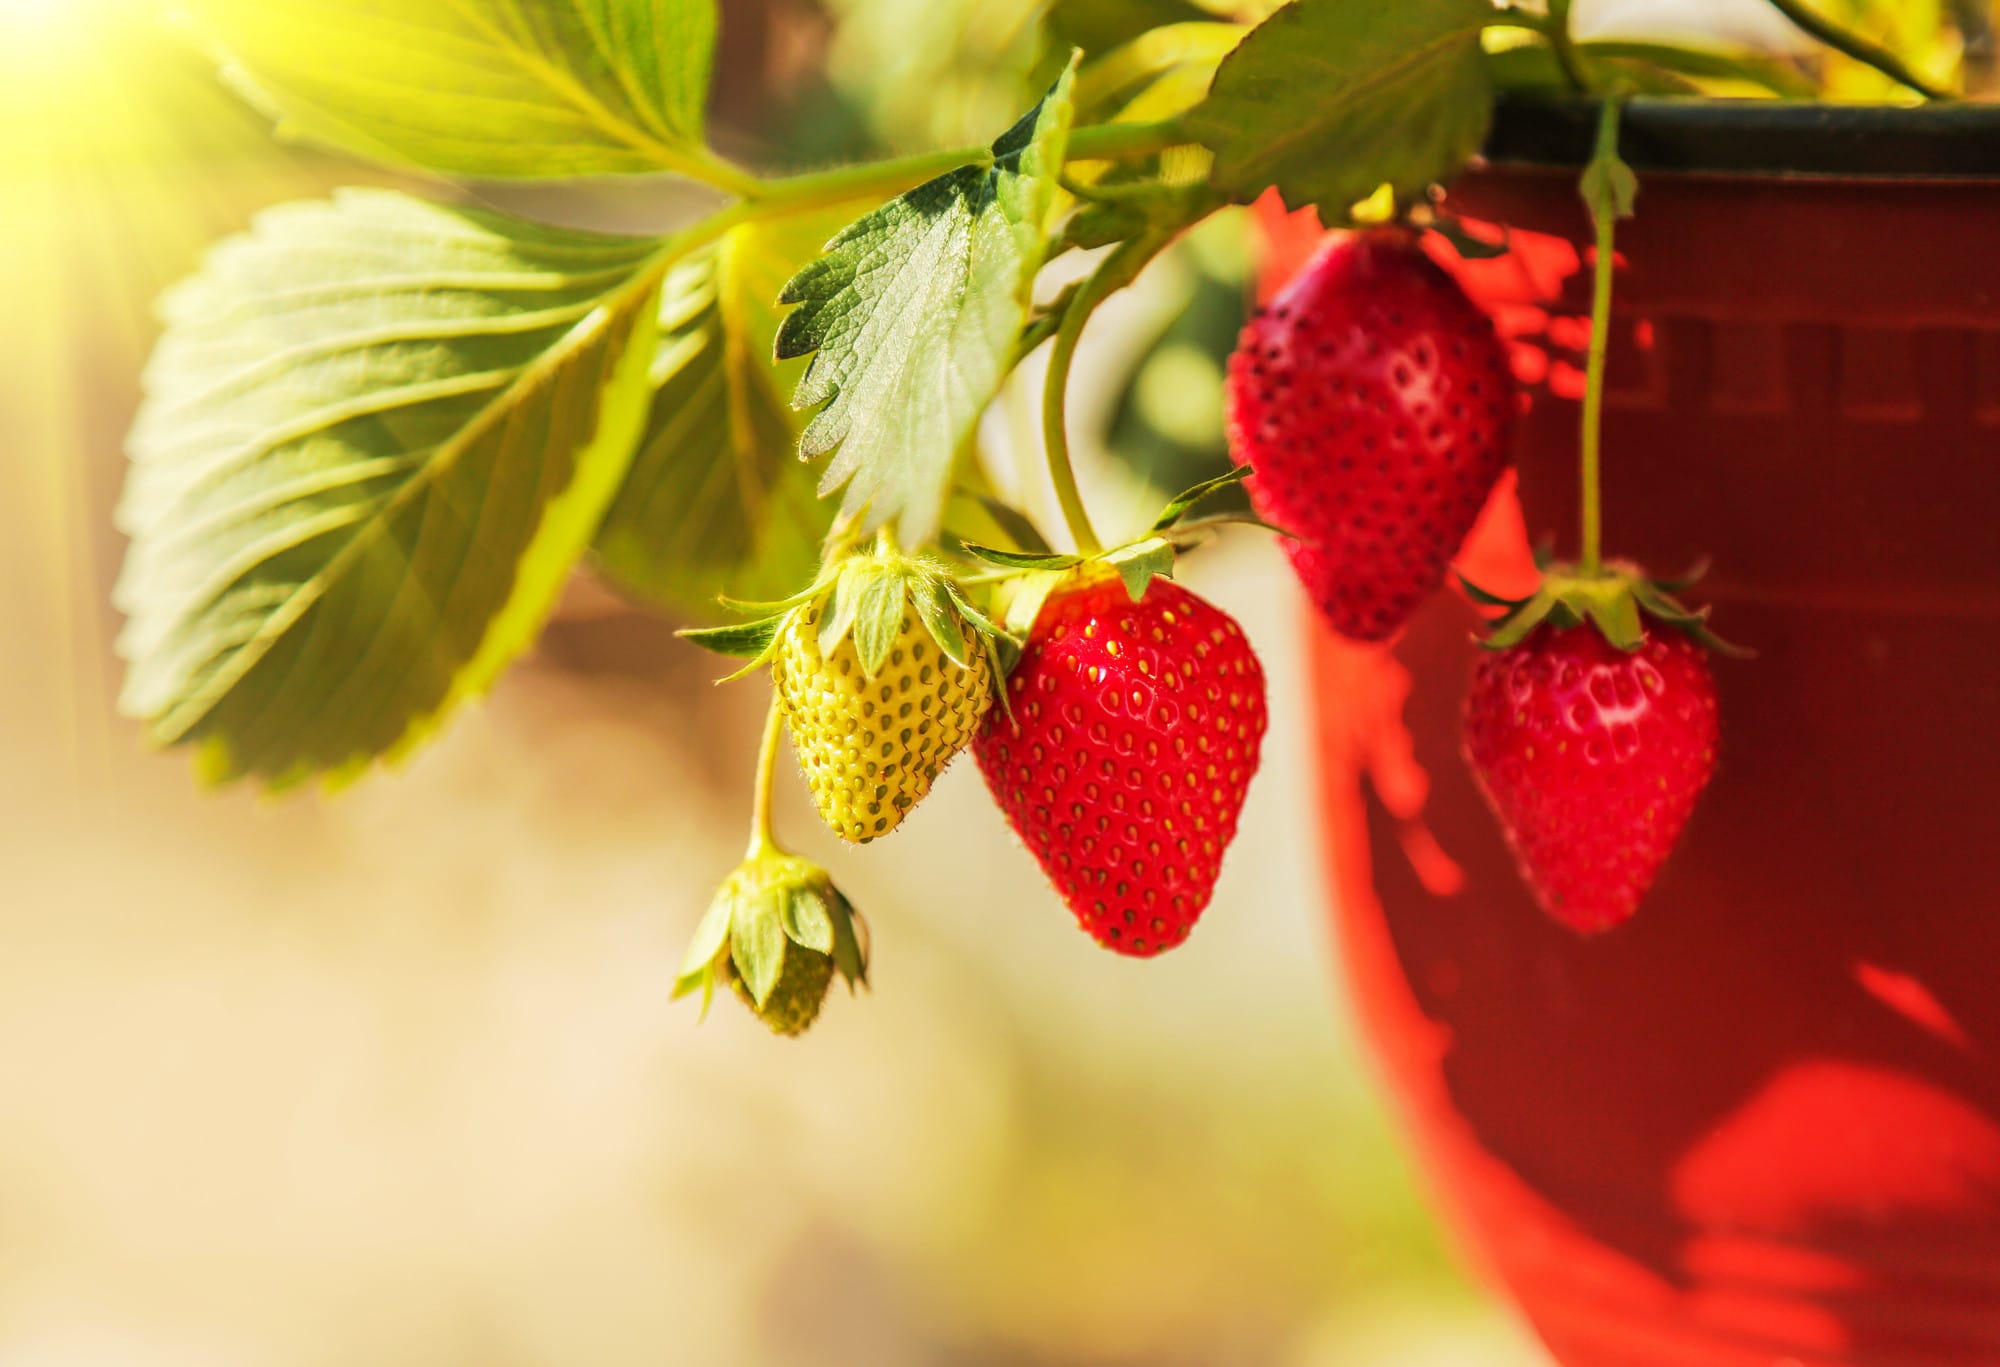 Growing Strawberries, use Straw to protect the fruit. Why we put